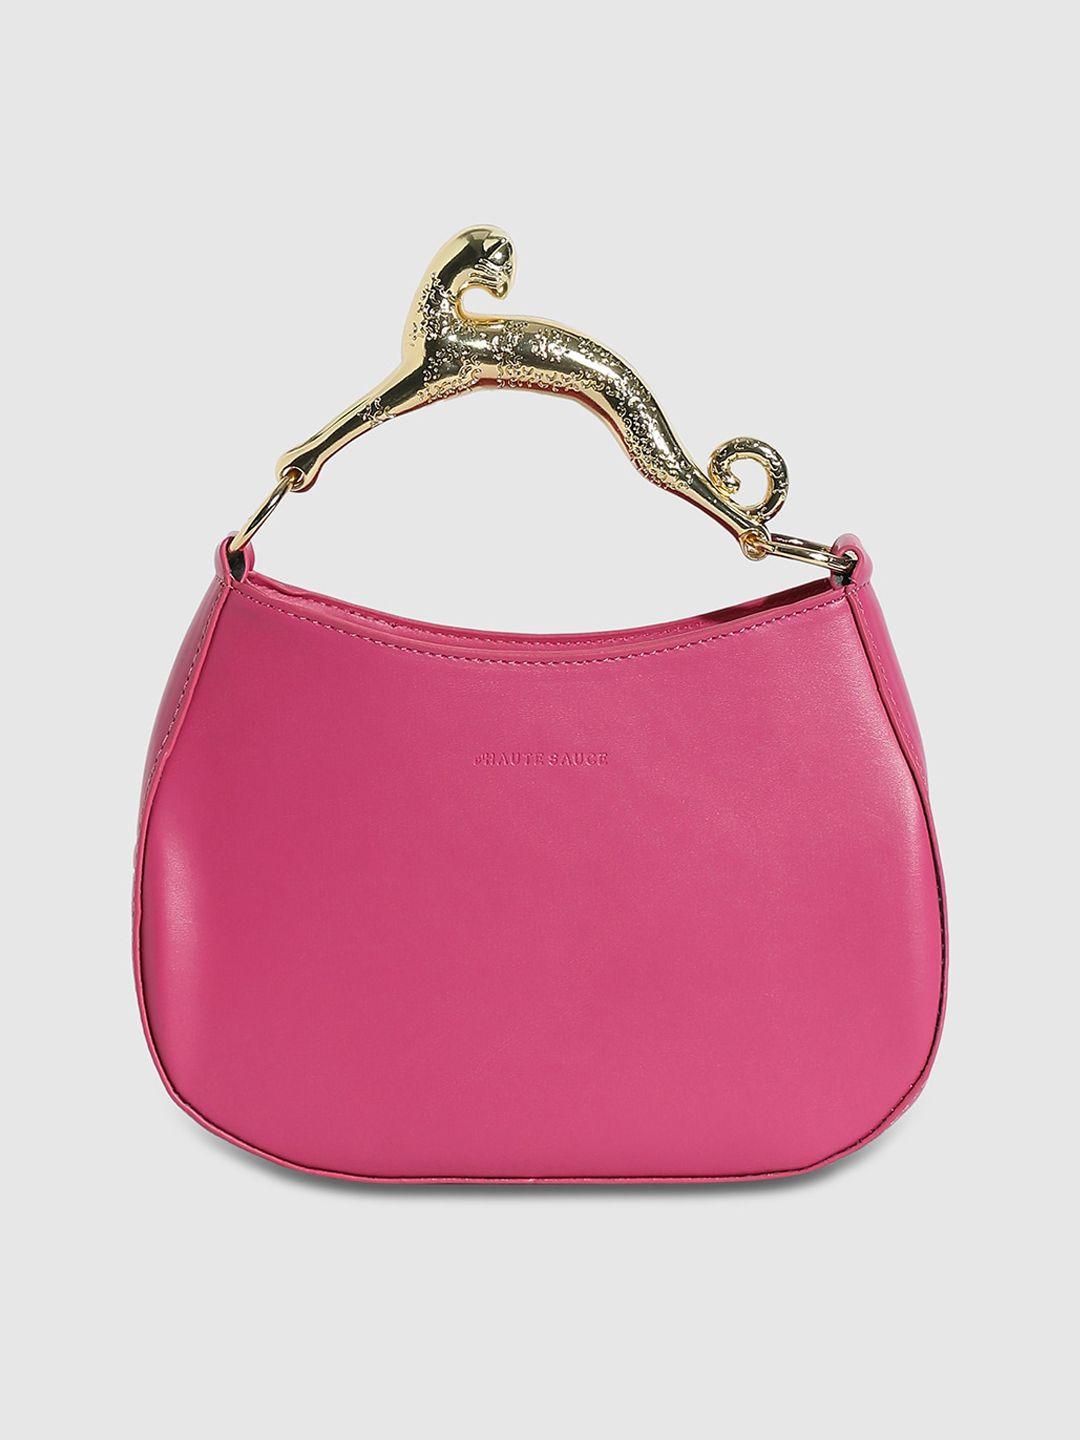 haute sauce by campus sutra pink colourblocked bowling handheld bag with bow detail